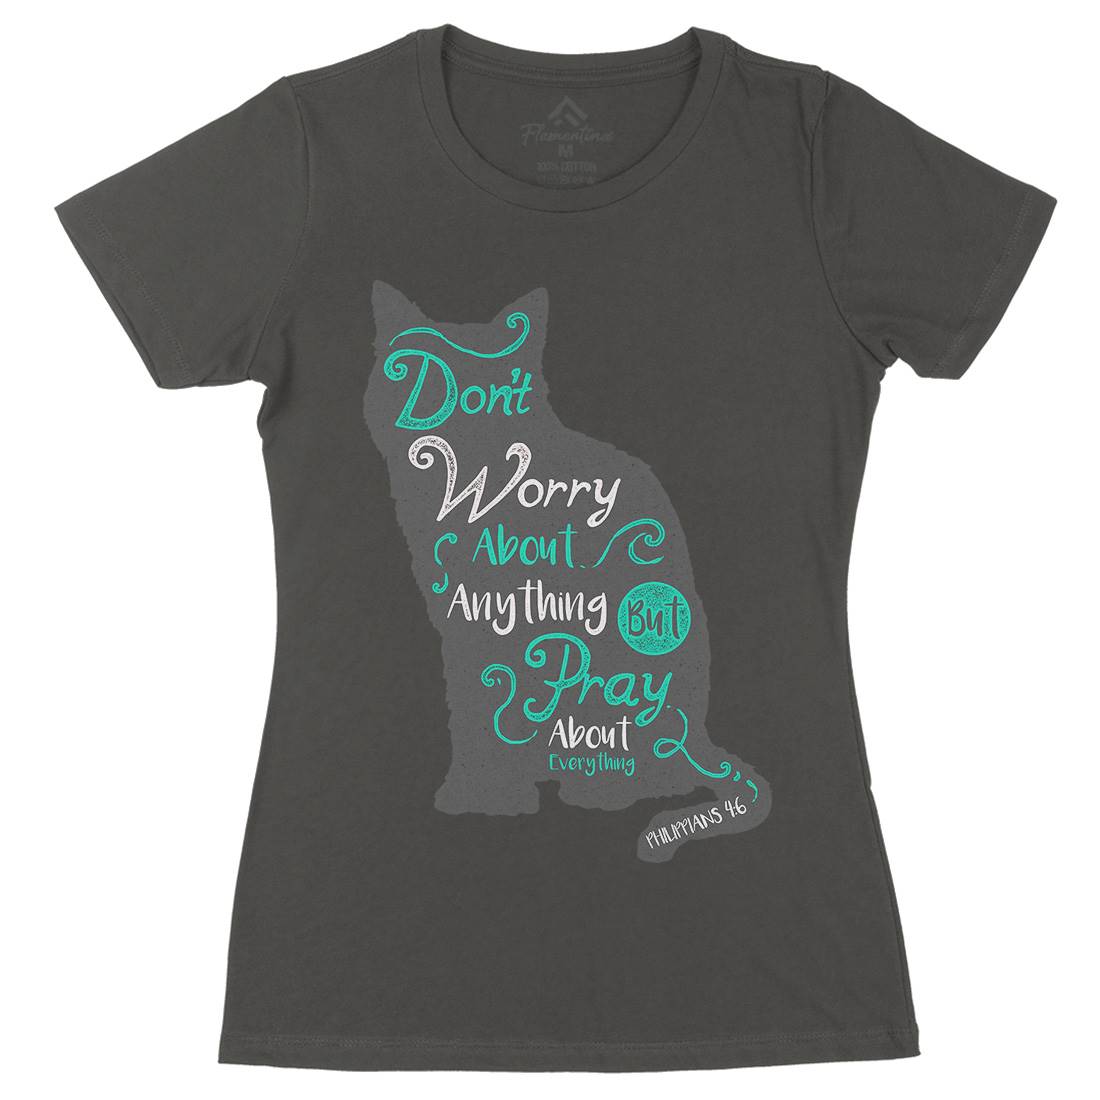 Pray For Everything Womens Organic Crew Neck T-Shirt Religion A360